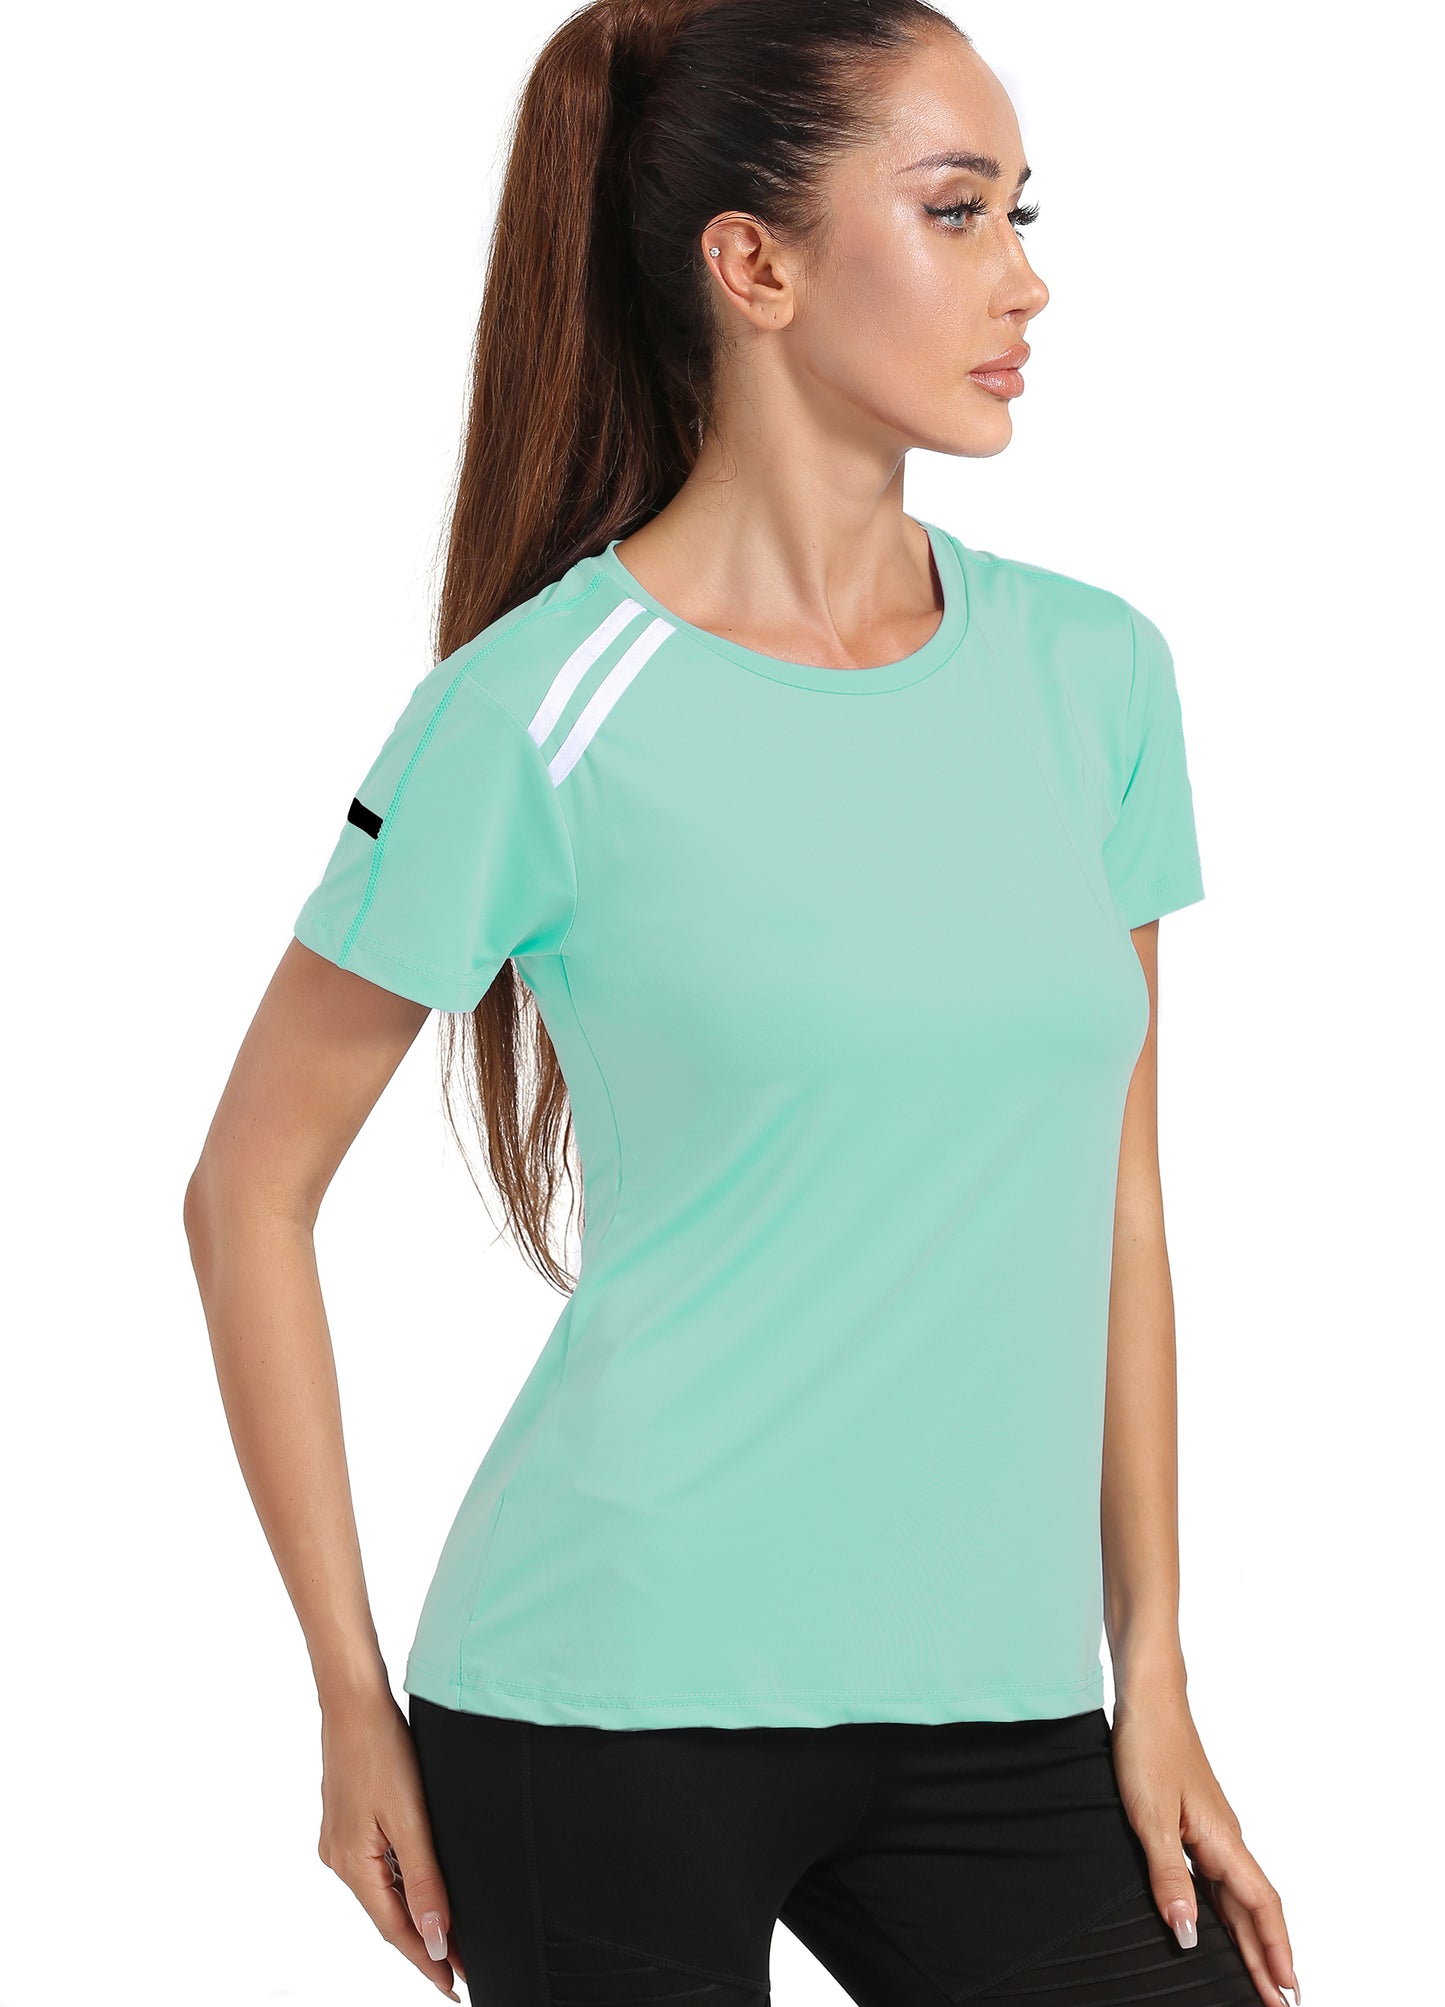 4POSE Women's Latest Summer QUICK Dry Tound Neck Stretch Mint Green Training Tee